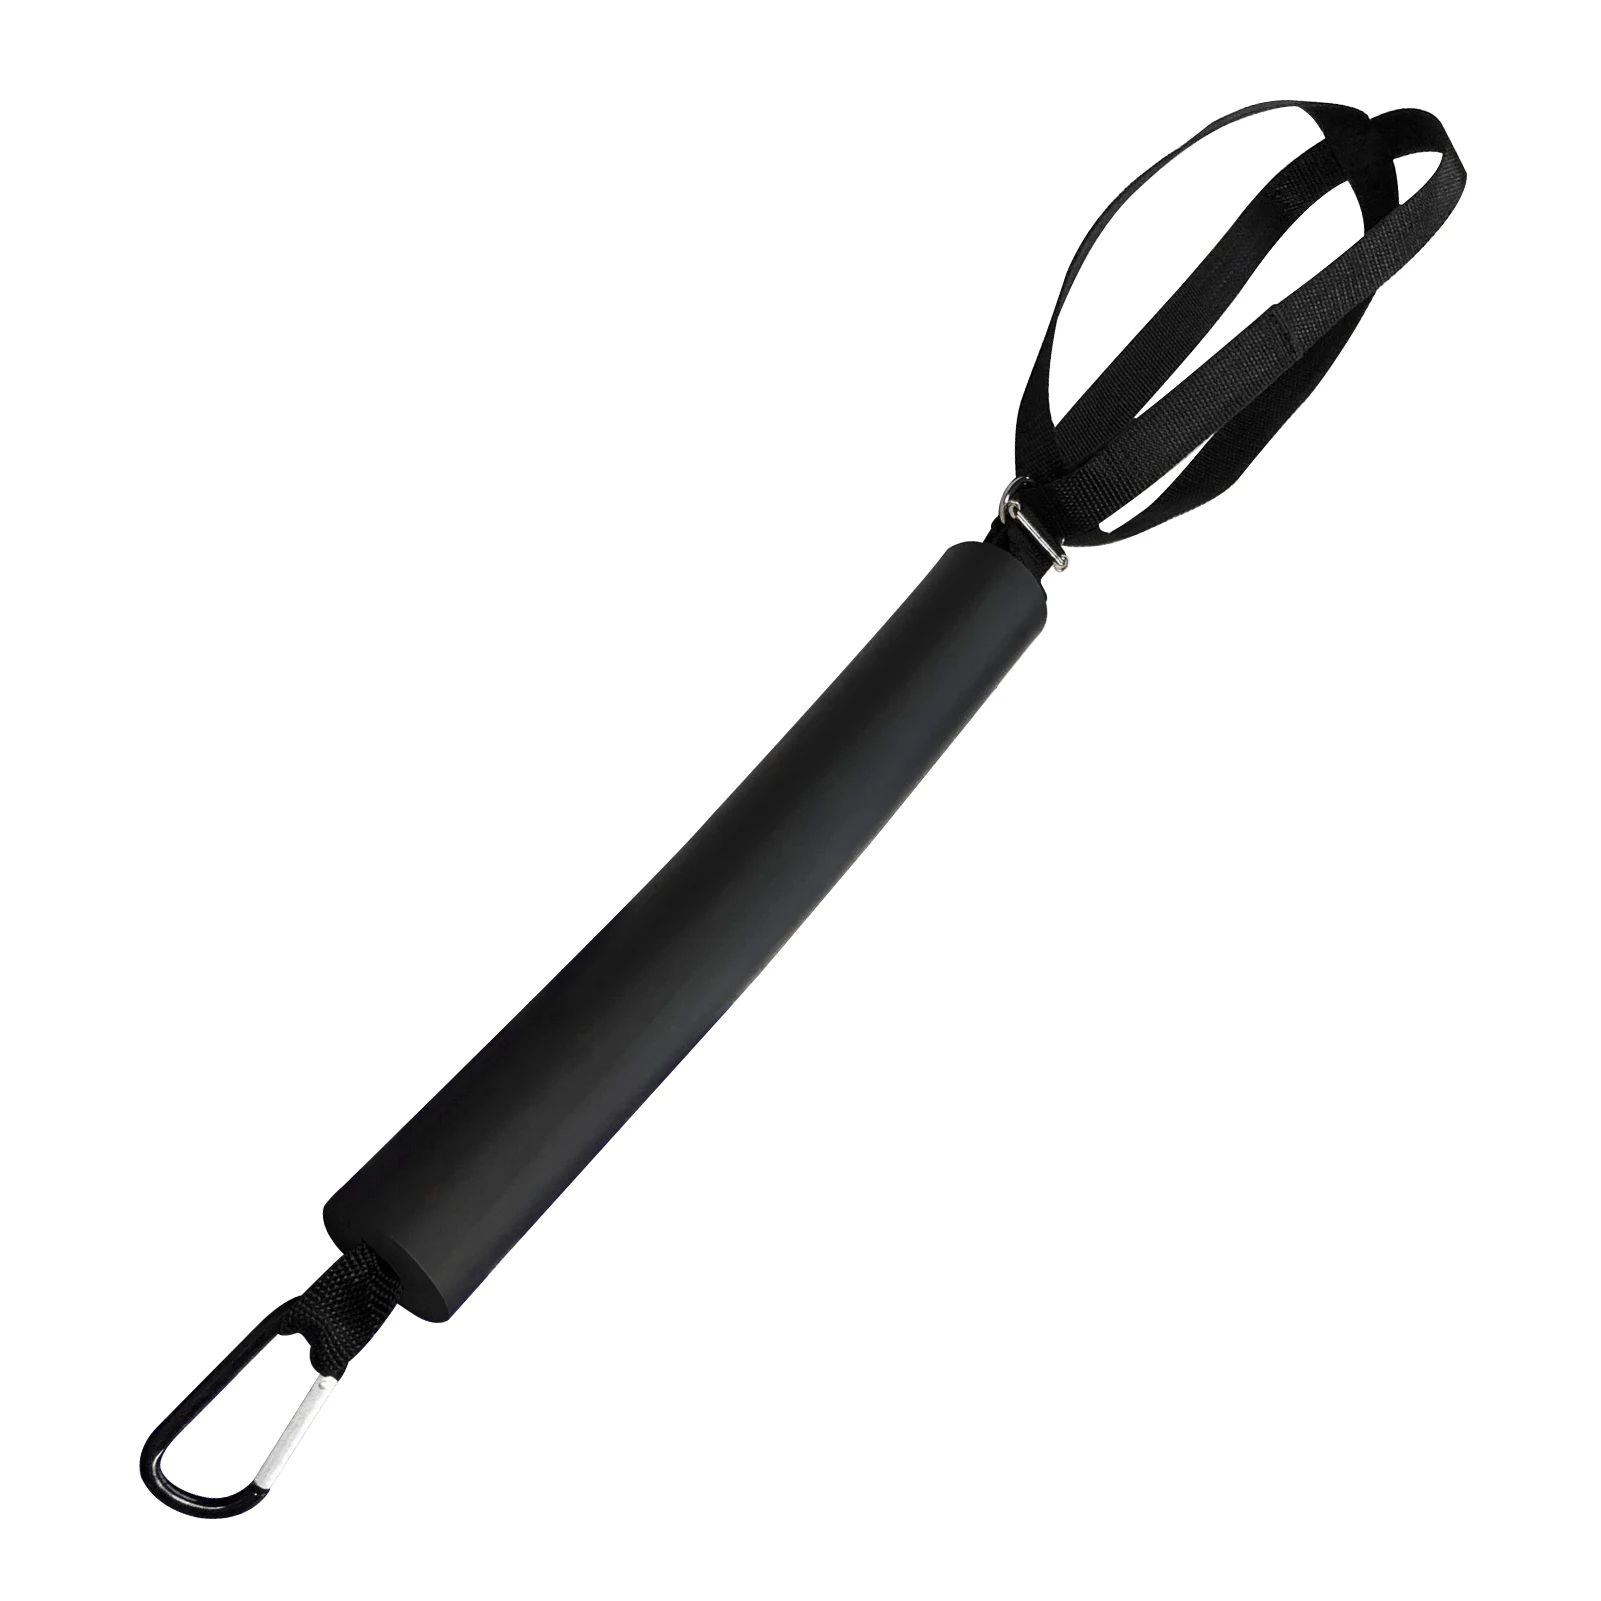 

Hanging Easy Use Improves Serving Basketball Hoop Neoprene Accessories Adjustable Length Training Aid Volleyball Spike Trainer